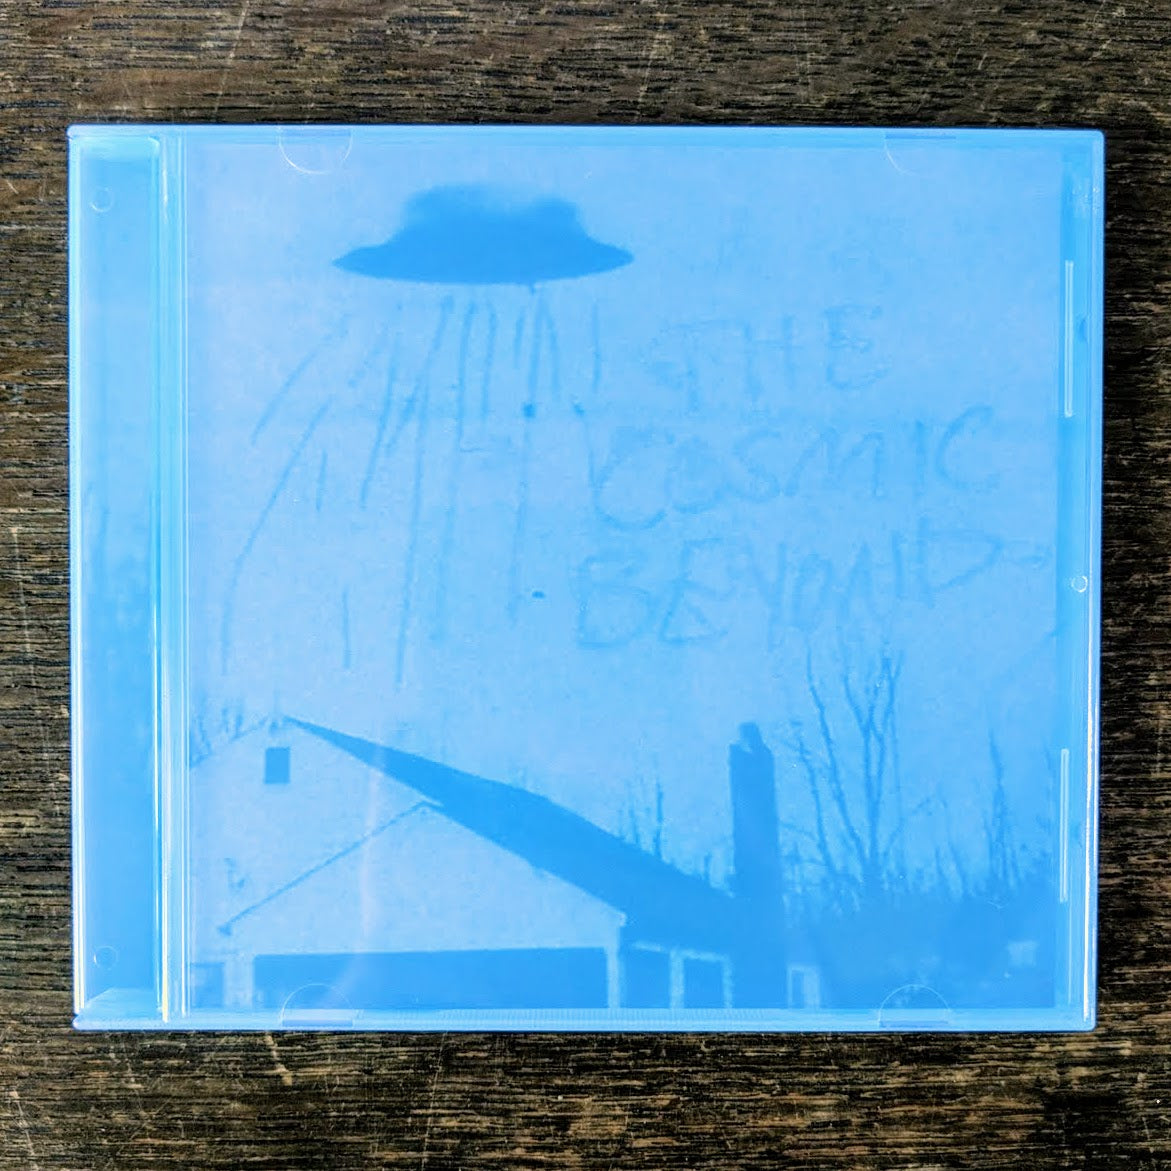 [SOLD OUT] SPRITZENWIRBEL "The Cosmic Beyond" CD (lim. 100)